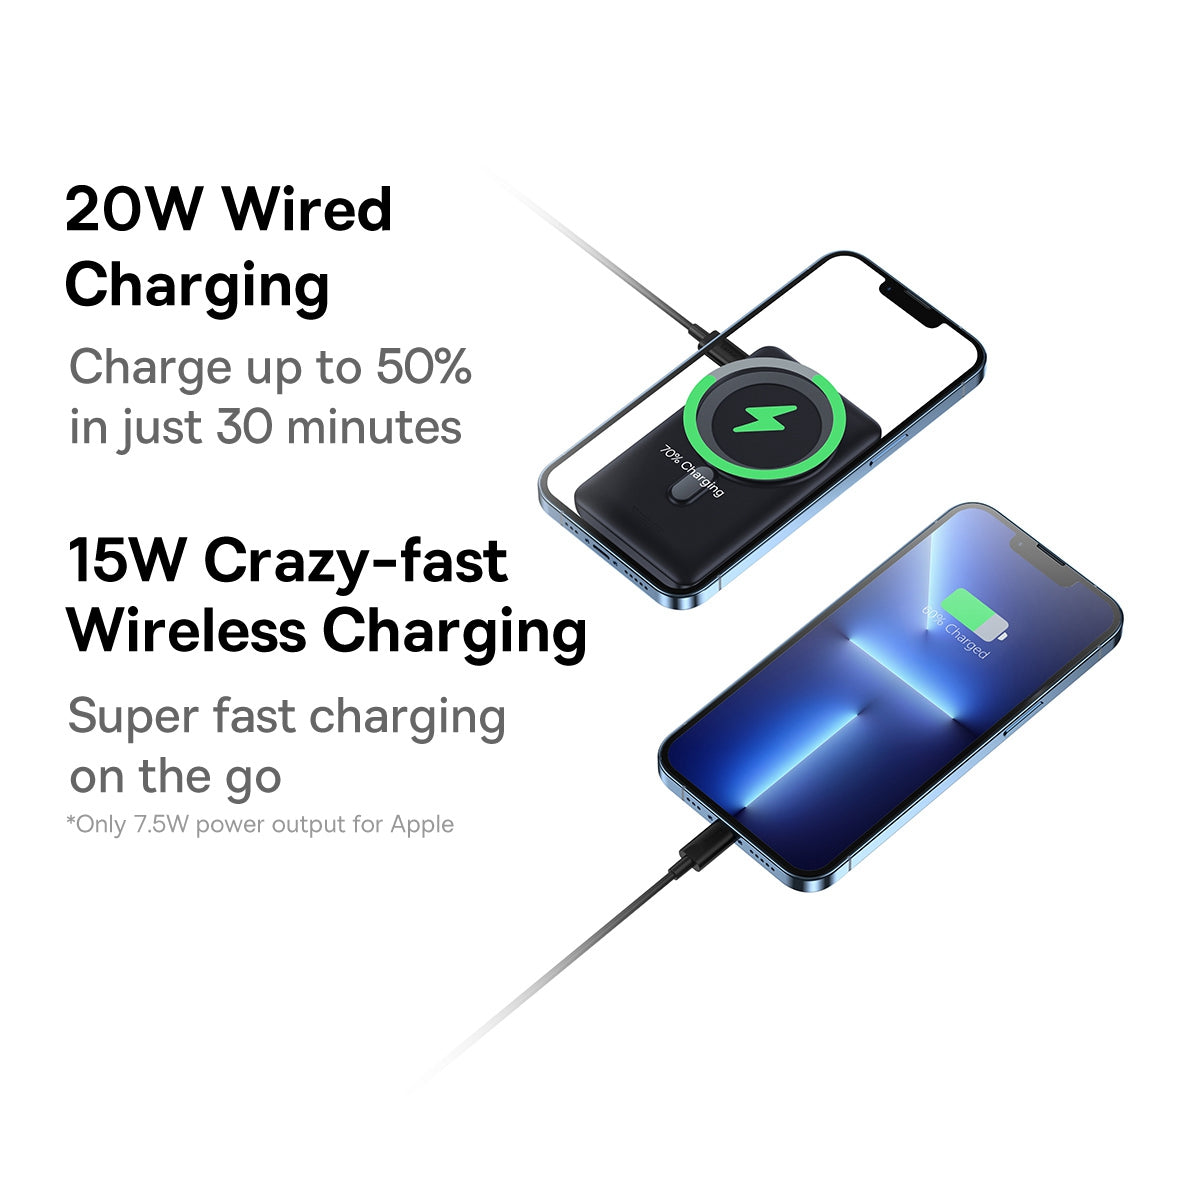 BASEUS 10000mAh Power Bank 20W Magnetic Wireless Charger Phone Quick Charging External Battery Pack Phone Holder Stand